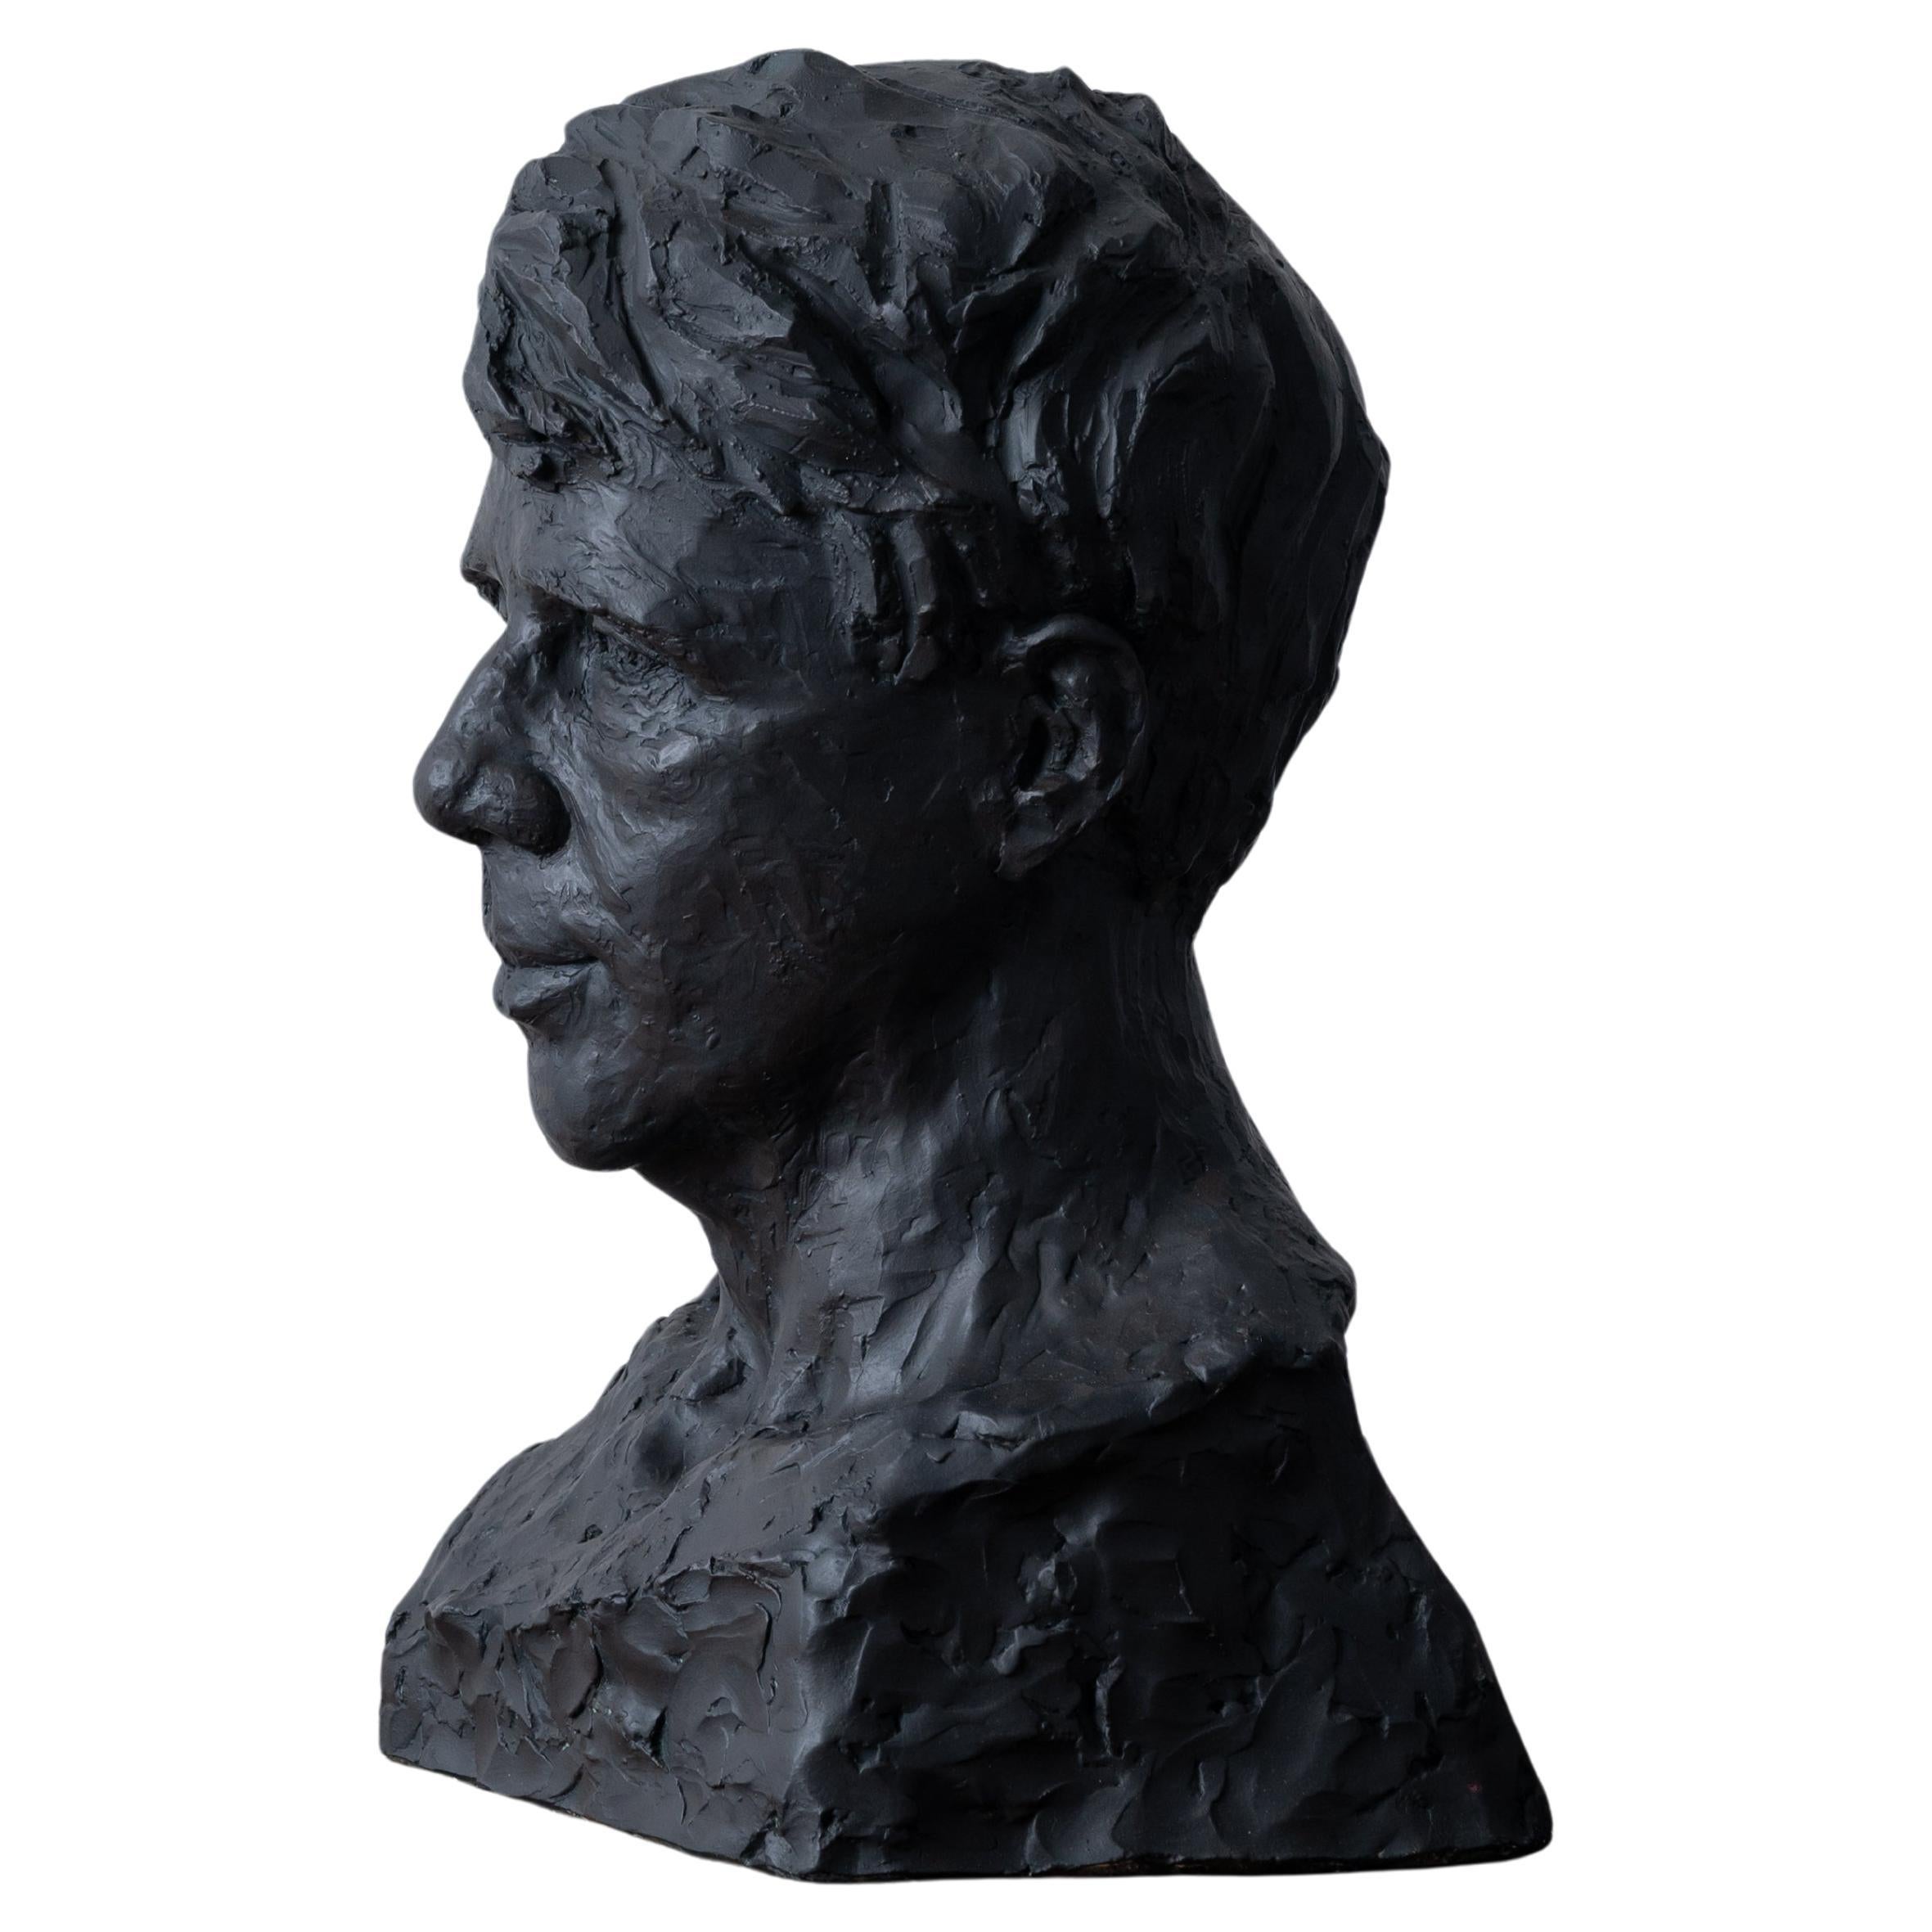 Robert Frost Bust by Florence Fiore, c.1930s For Sale